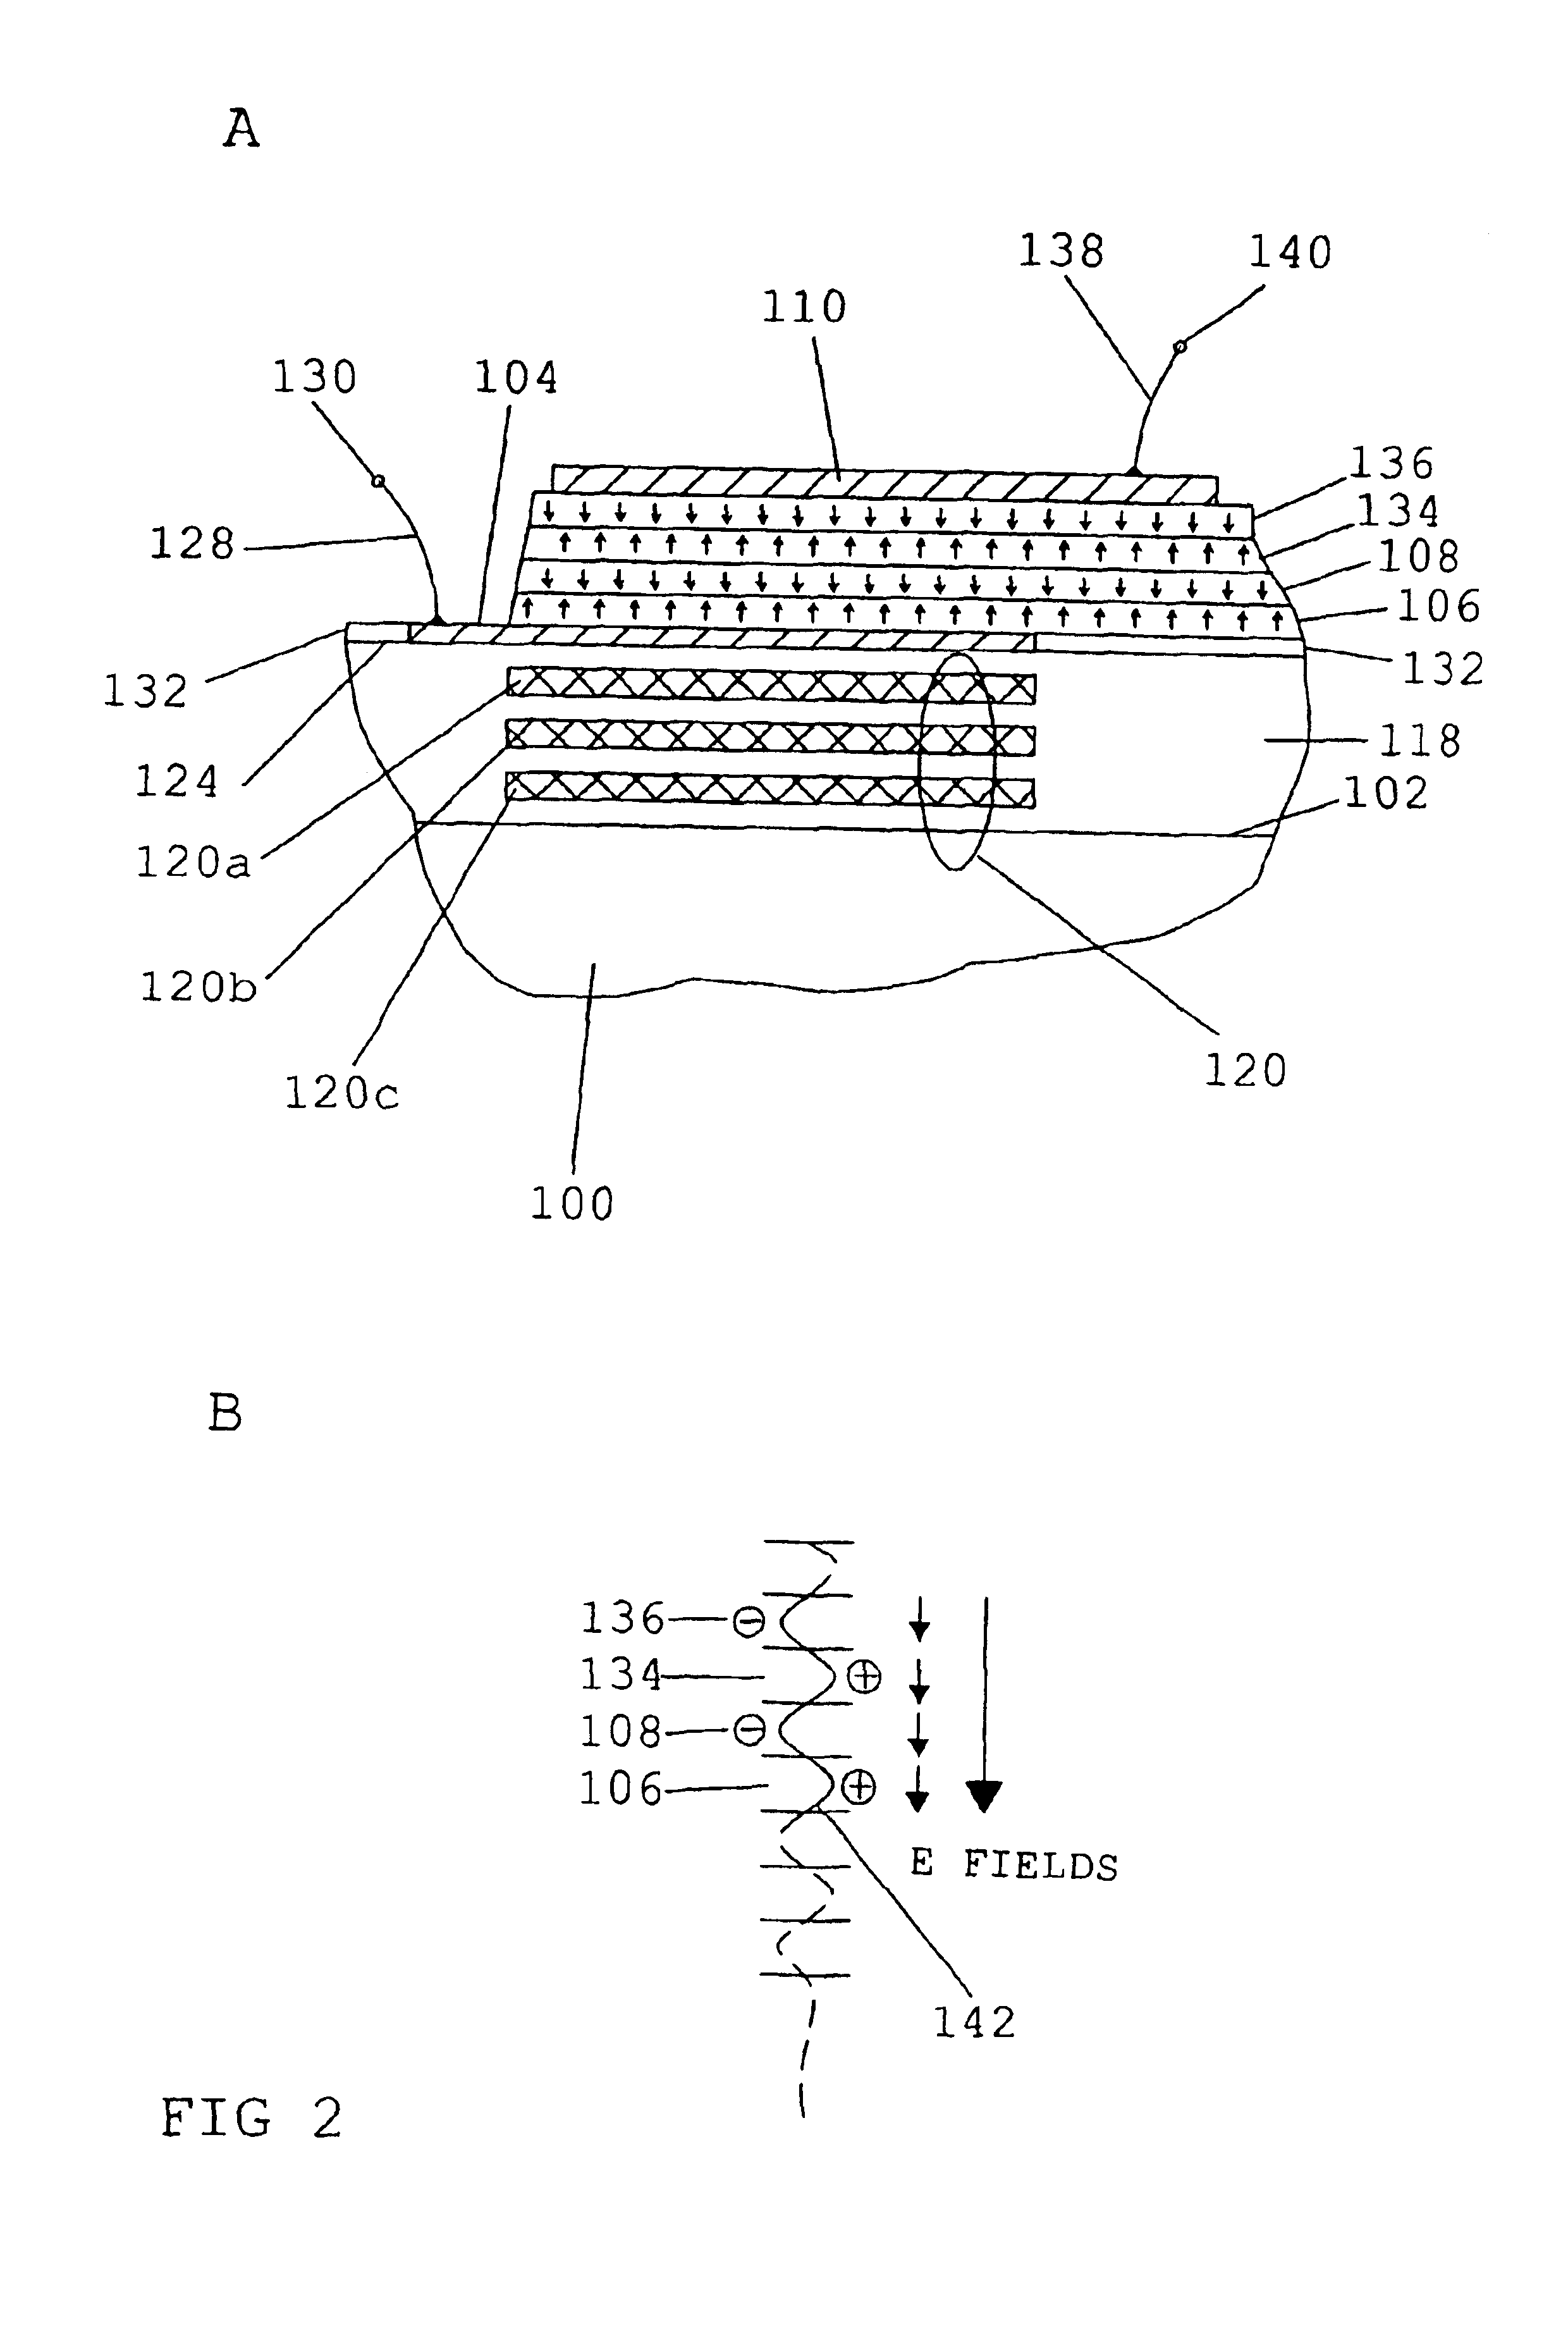 BAW resonator having piezoelectric layers oriented in opposed directions